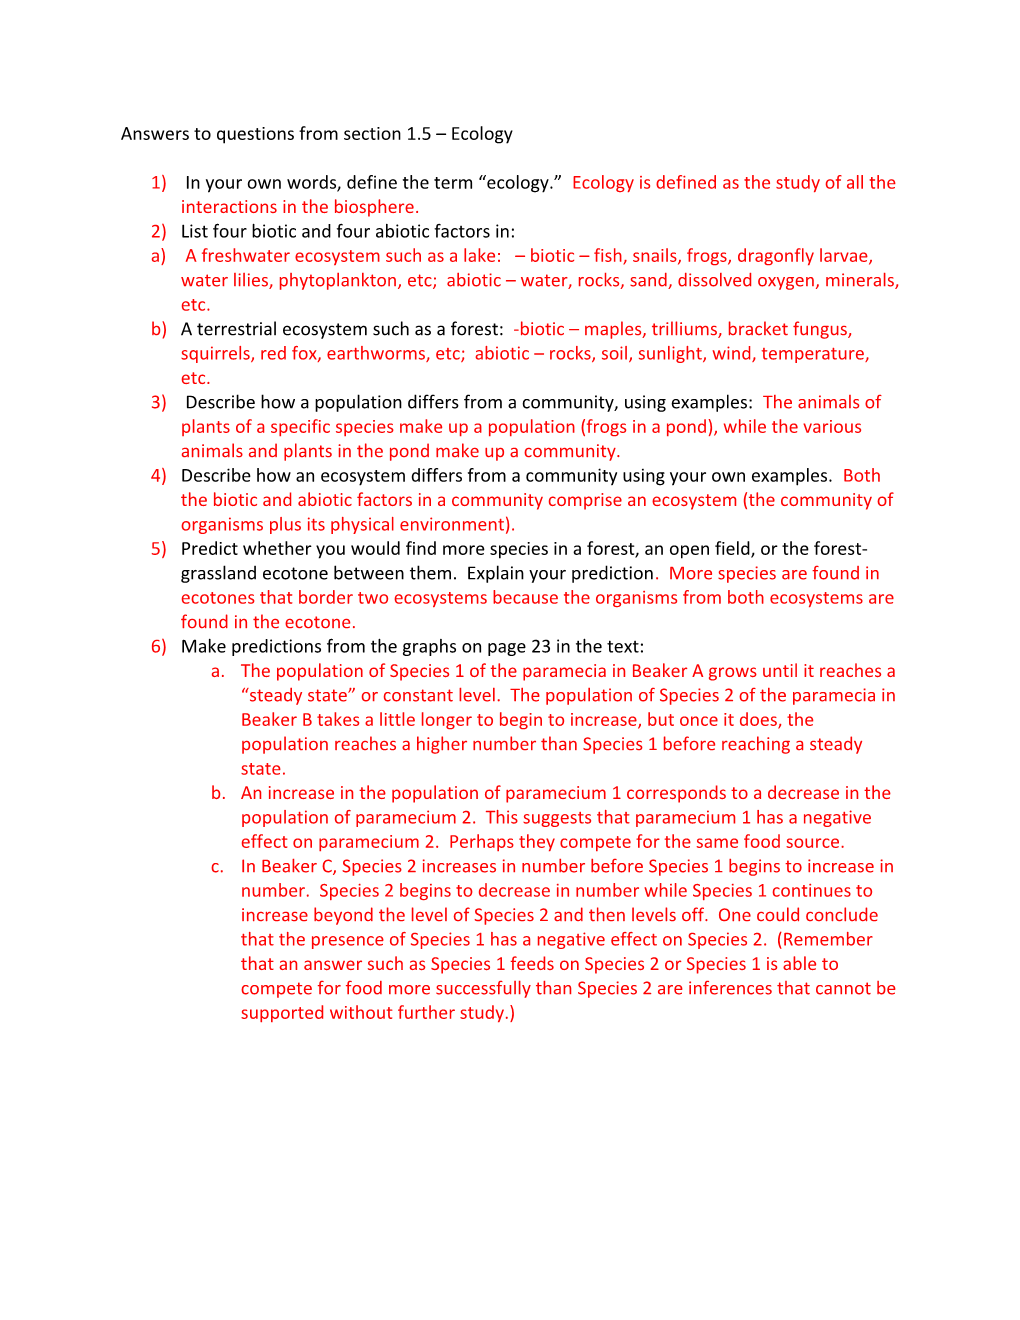 Answers to Questions from Section 1.5 Ecology